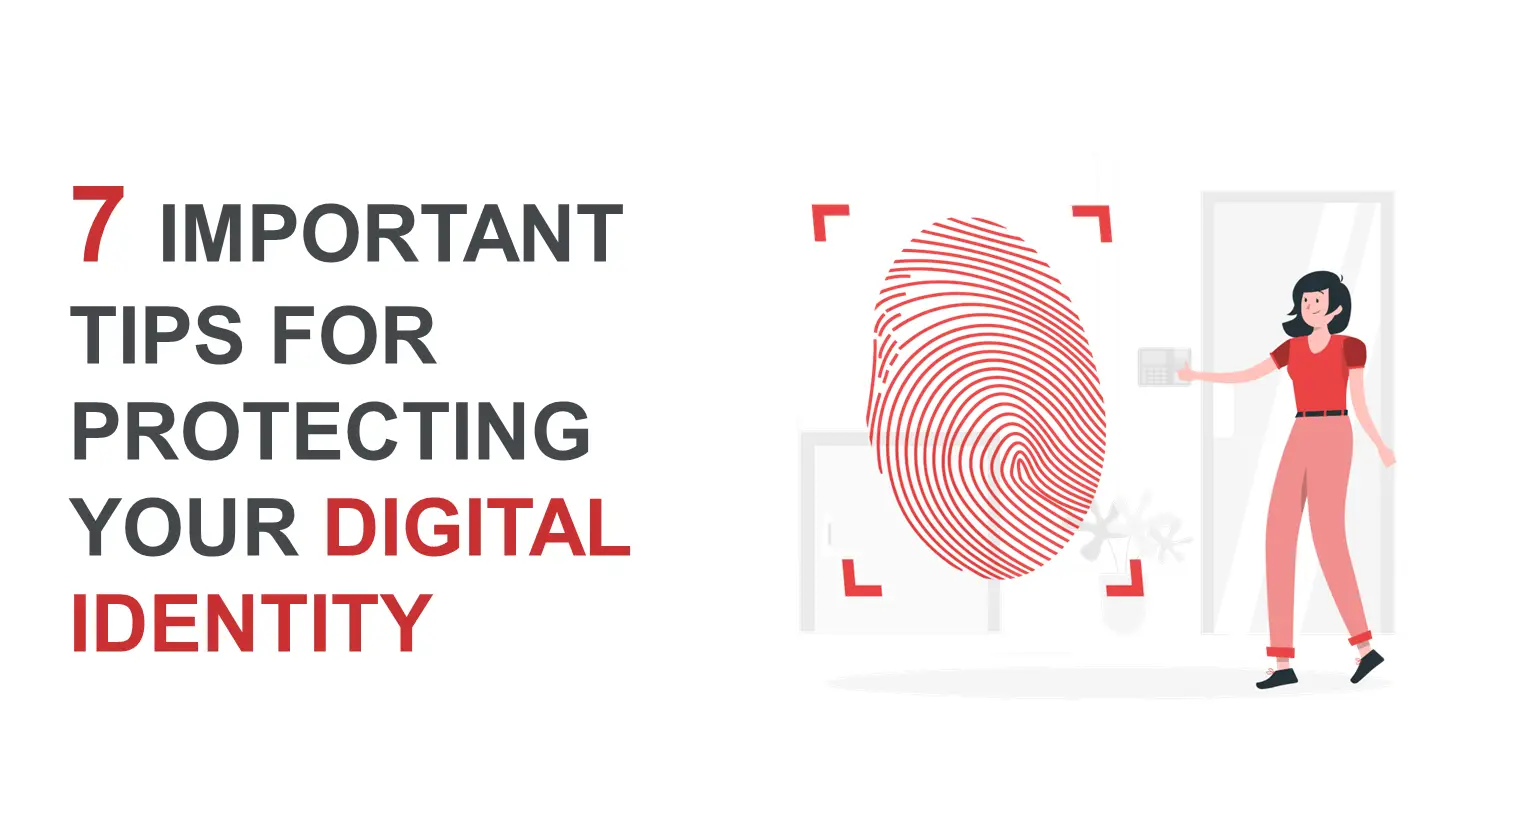 7 Important Tips for Protecting Your Digital Identity